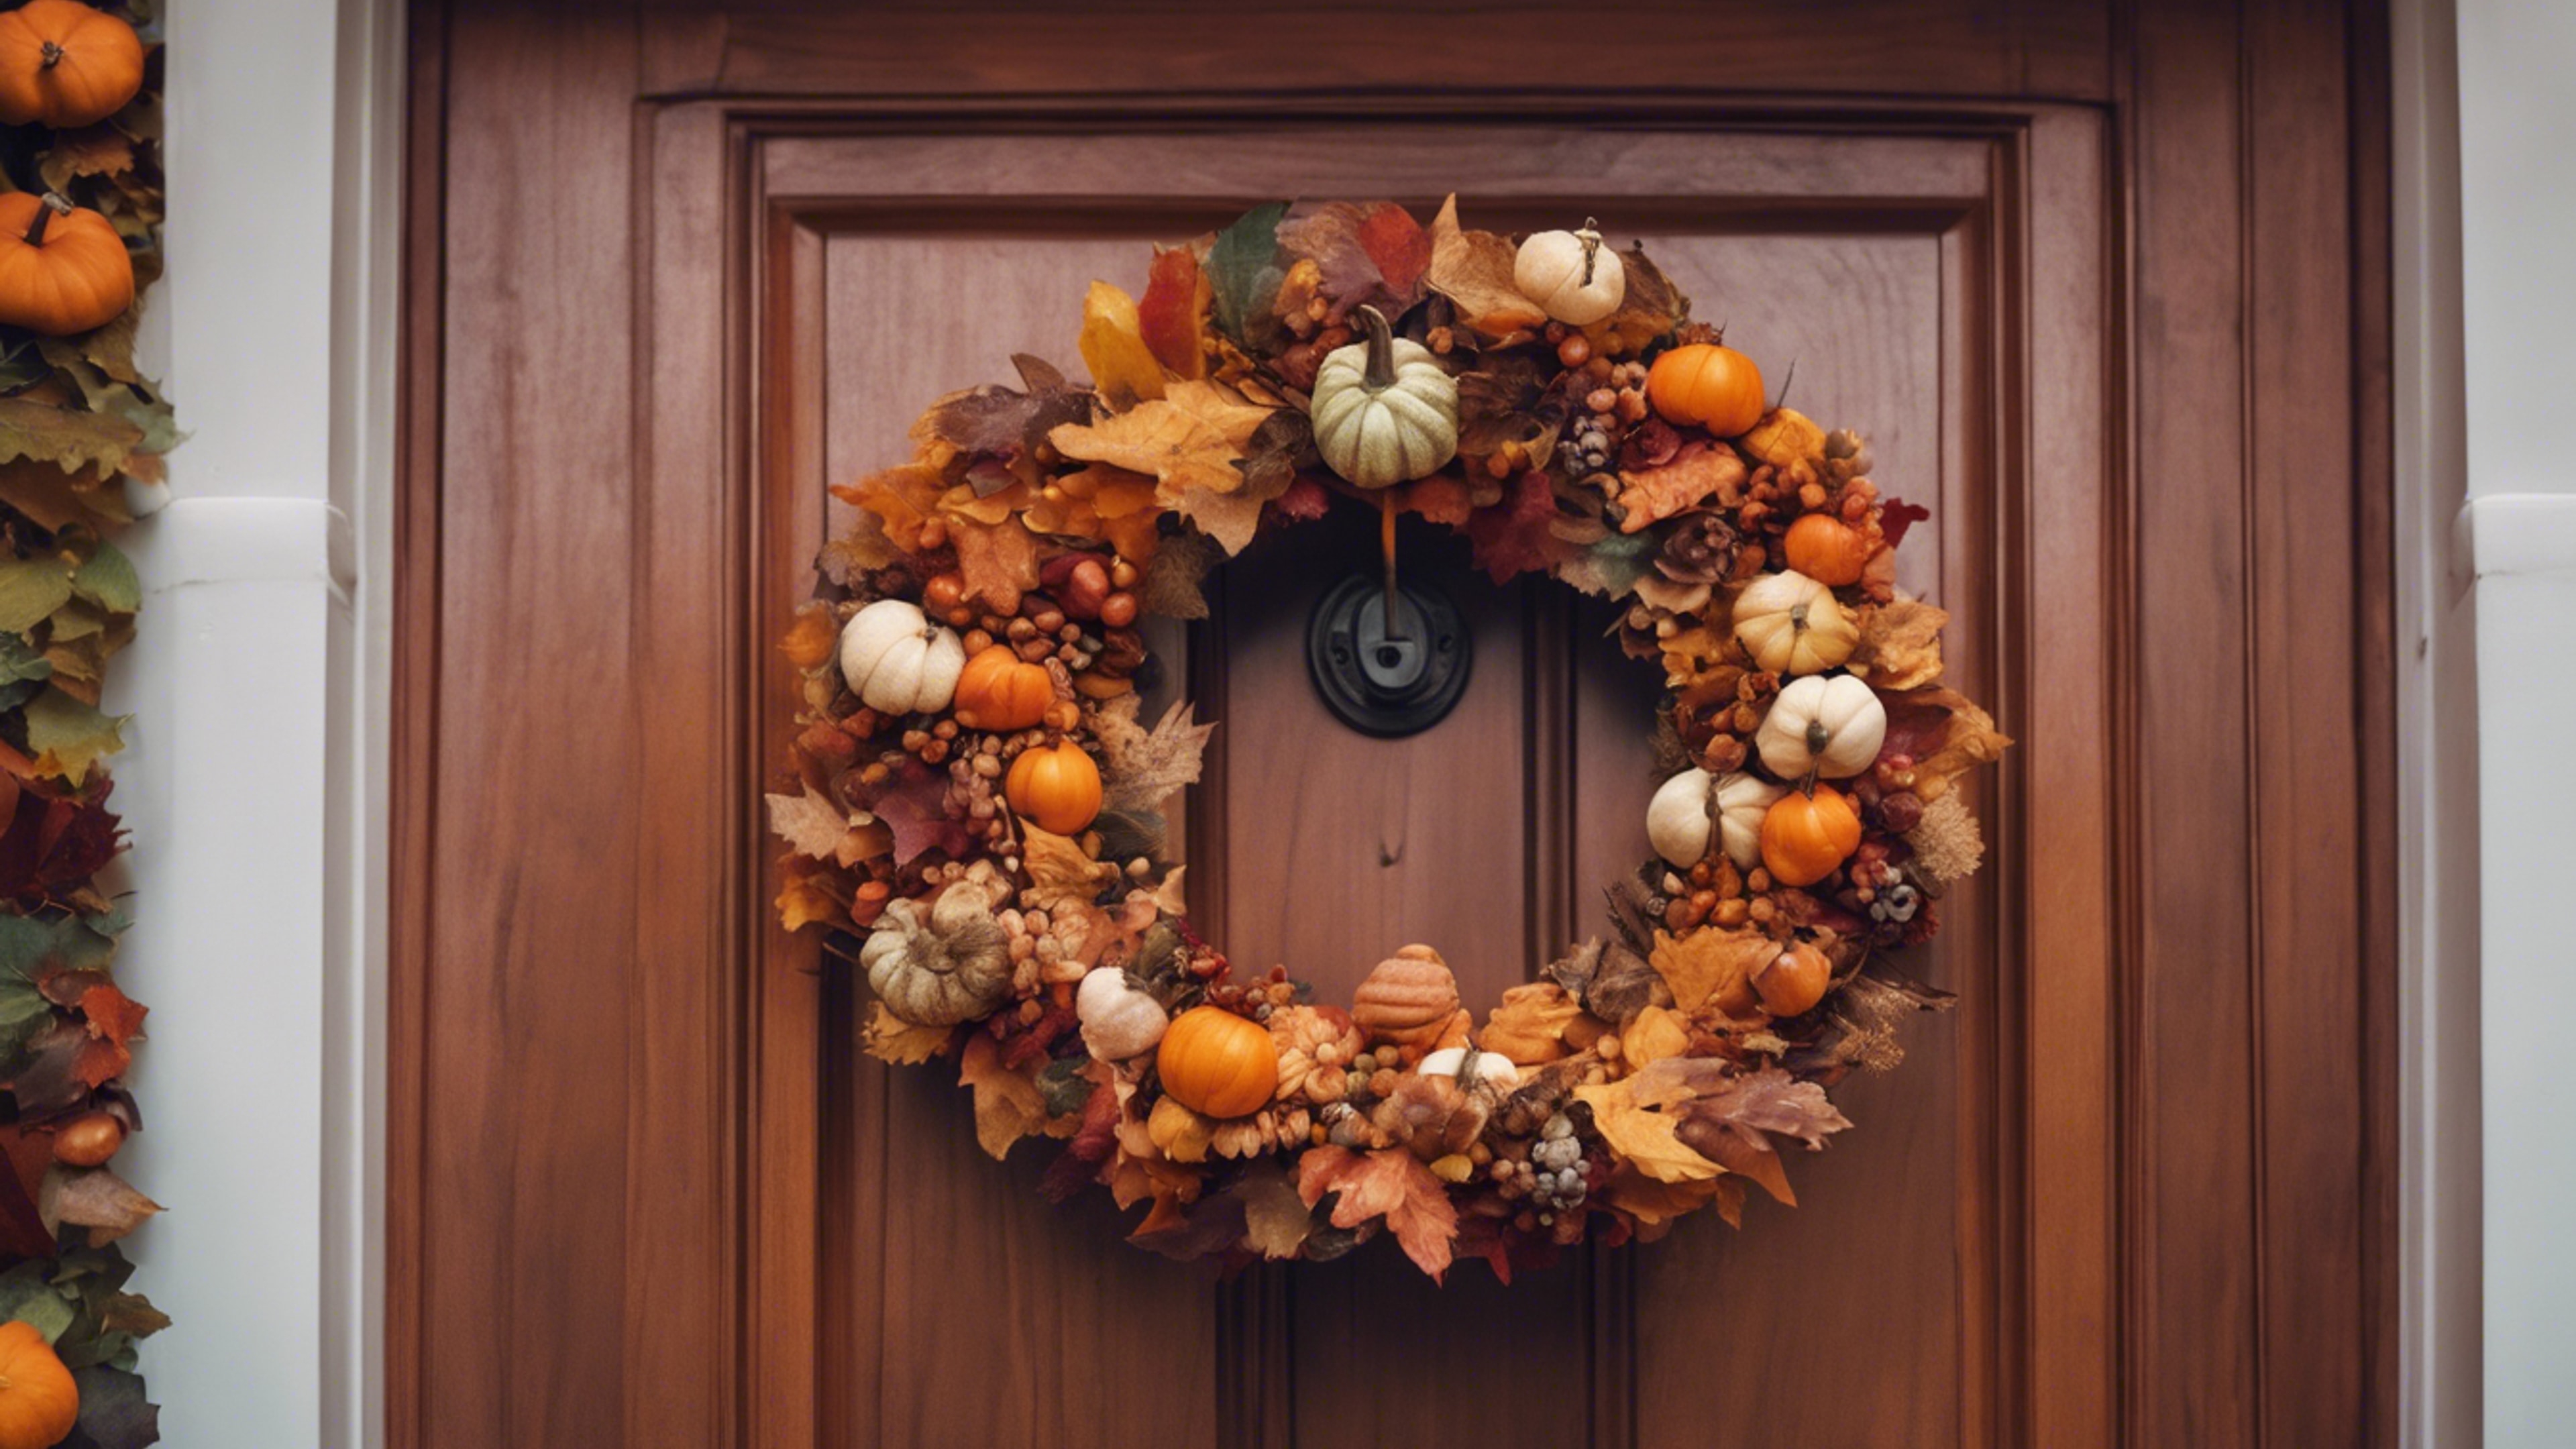 A festive autumn wreath made of colorful fall leaves and miniature pumpkins hanging elegantly on a mahogany door, signaling the start of the Thanksgiving holiday. ផ្ទាំង​រូបភាព[f1a39b05ecd5476686a3]